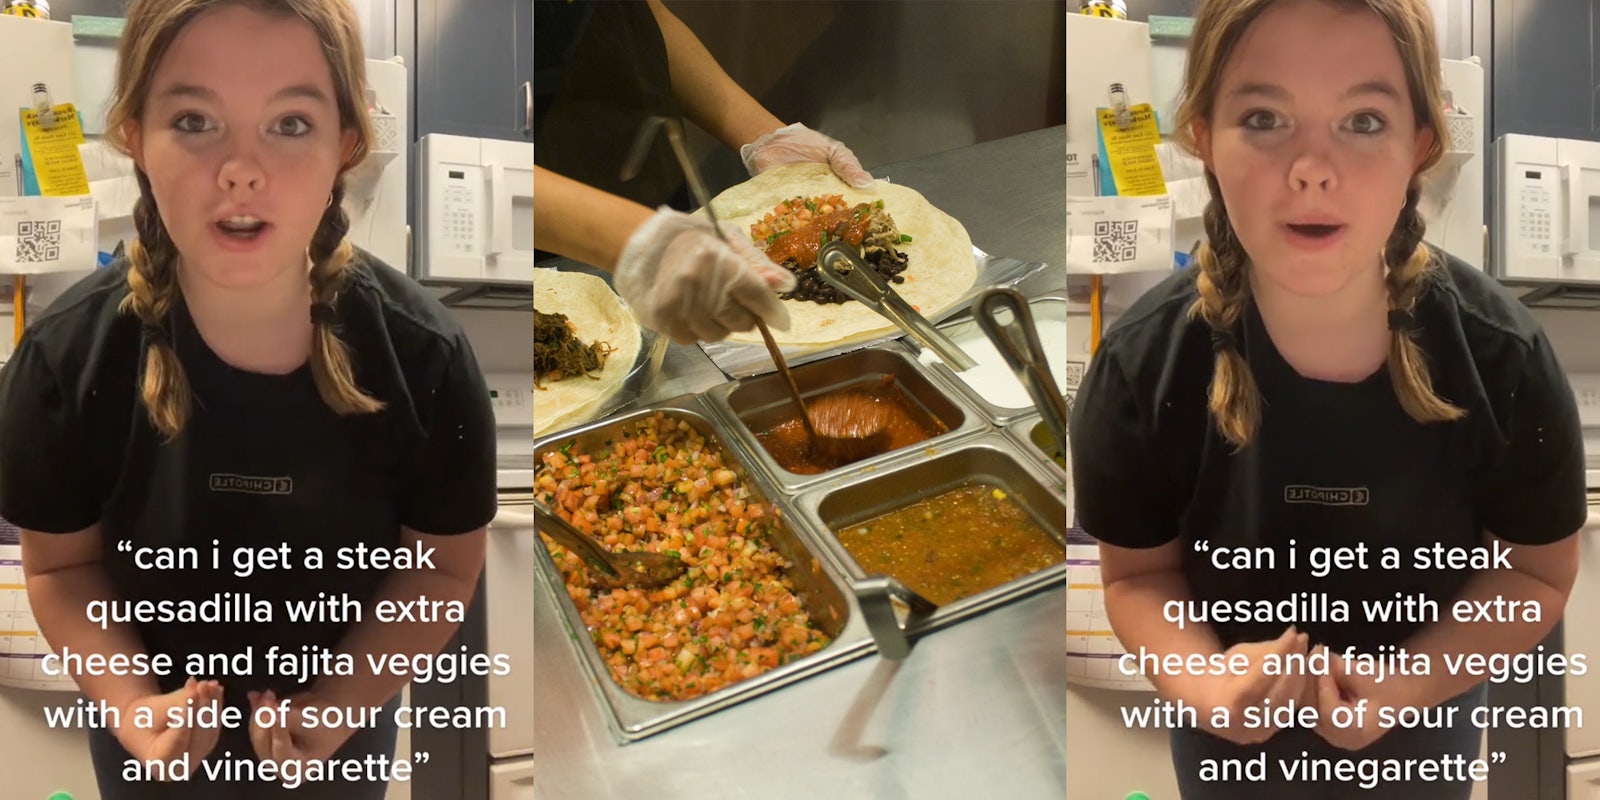 Chipotle worker with caption ''can i get a steak quesadilla with extra cheese and fajita veggies with a side of sour cream and vinaigrette'' (l) Chipotle worker making food (c) Chipotle worker with caption ''can i get a steak quesadilla with extra cheese and fajita veggies with a side of sour cream and vinaigrette'' (r)